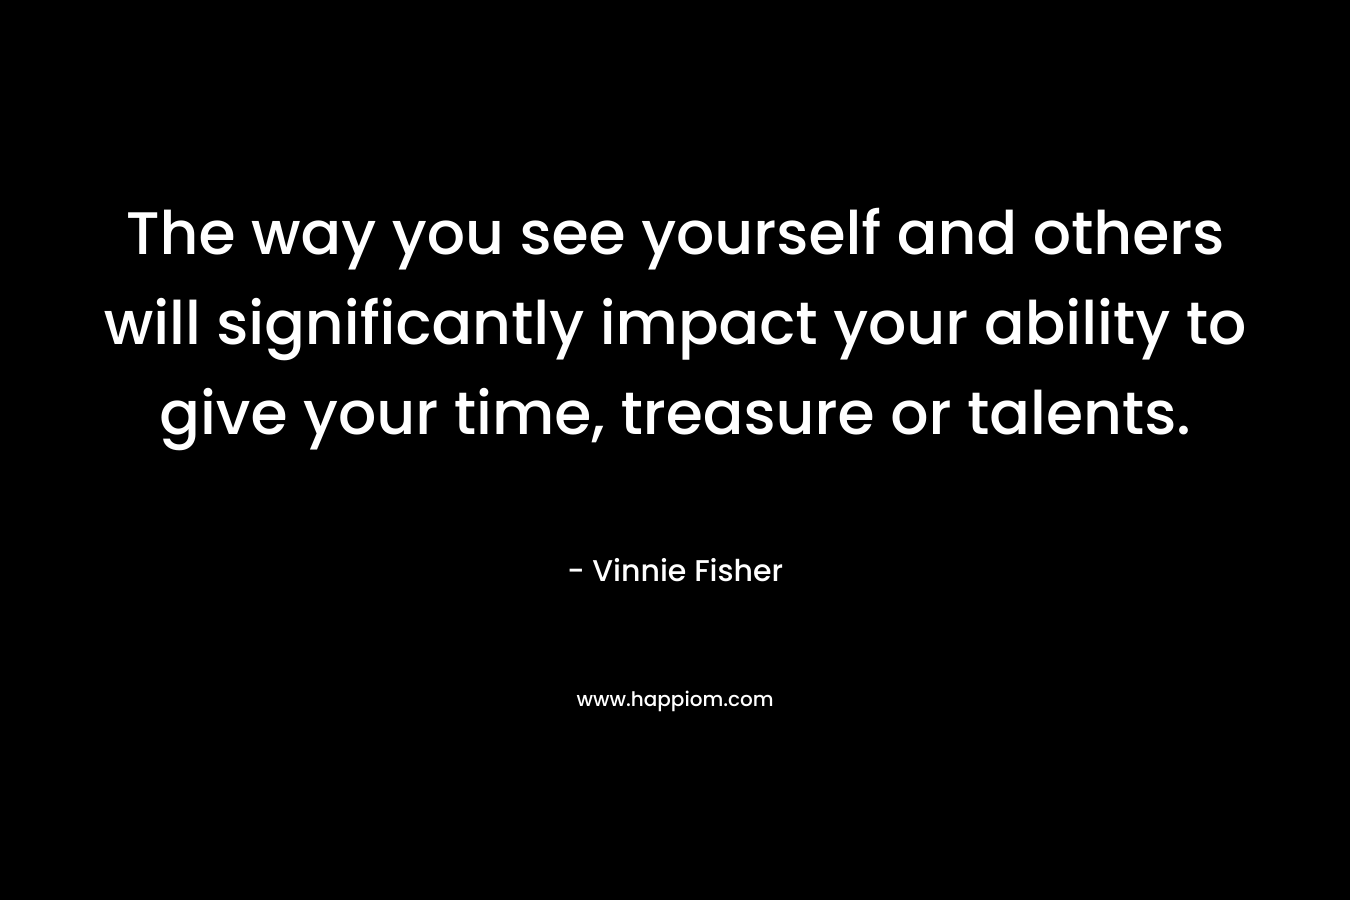 The way you see yourself and others will significantly impact your ability to give your time, treasure or talents. – Vinnie Fisher